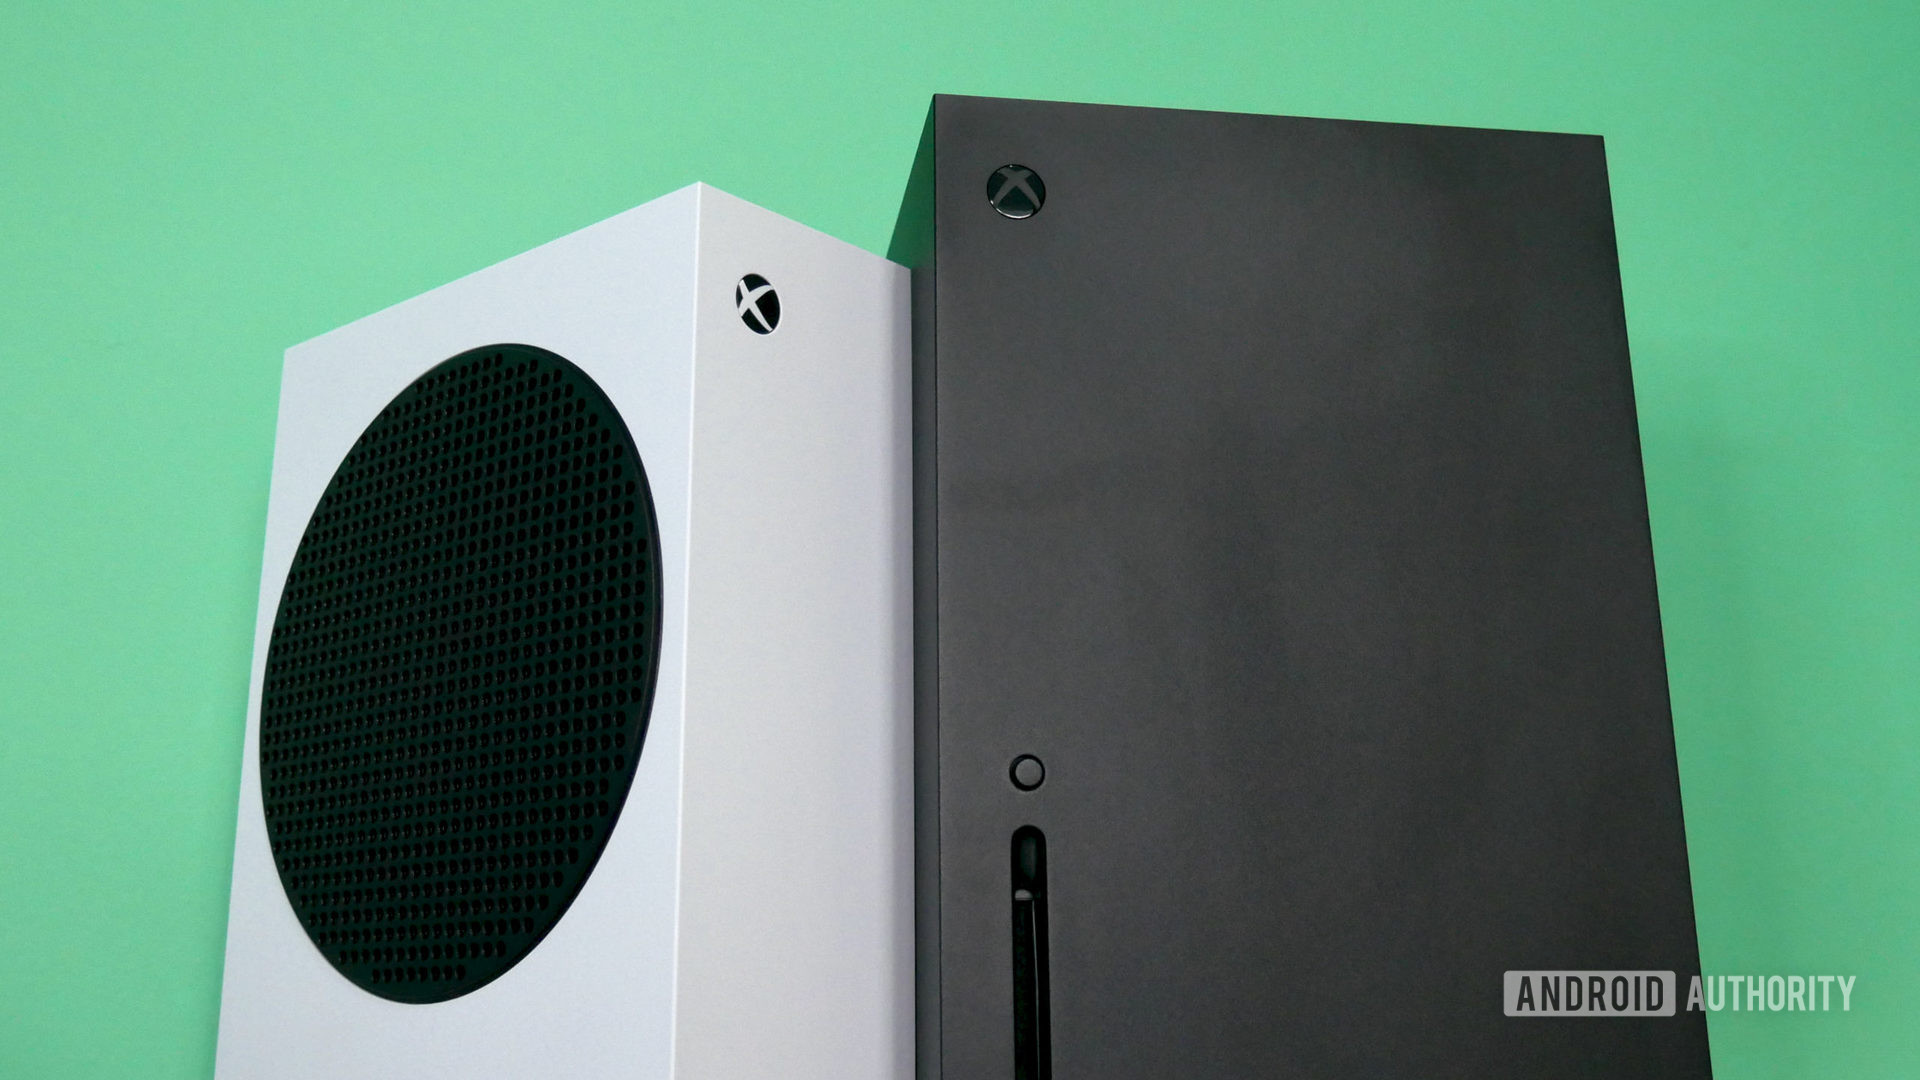 Choosing the Right Xbox: Series X or Series S